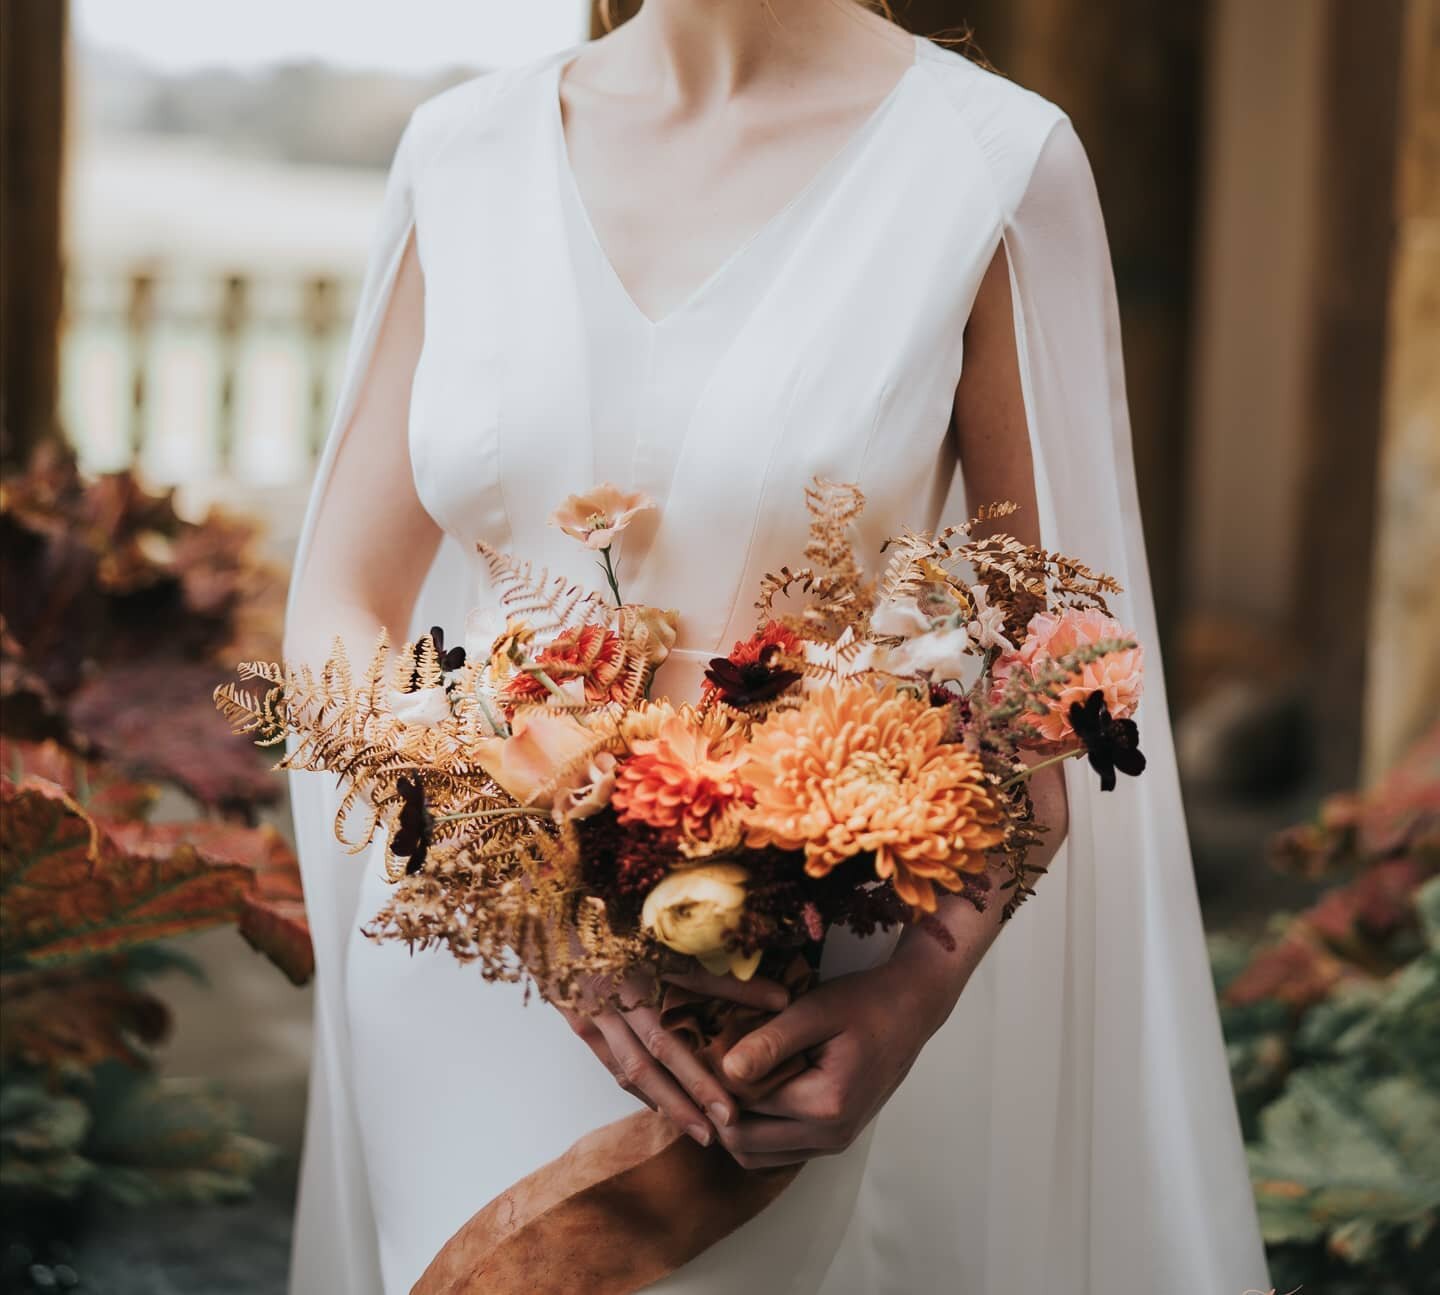 We have been busy booking in lots of Autumn/Winter 2021 weddings this week and it has to be one of our favourite colour palettes. 

Lots of brides we've spoken to have been apprehensive about moving their wedding from a summer to Autumn/Winter date a